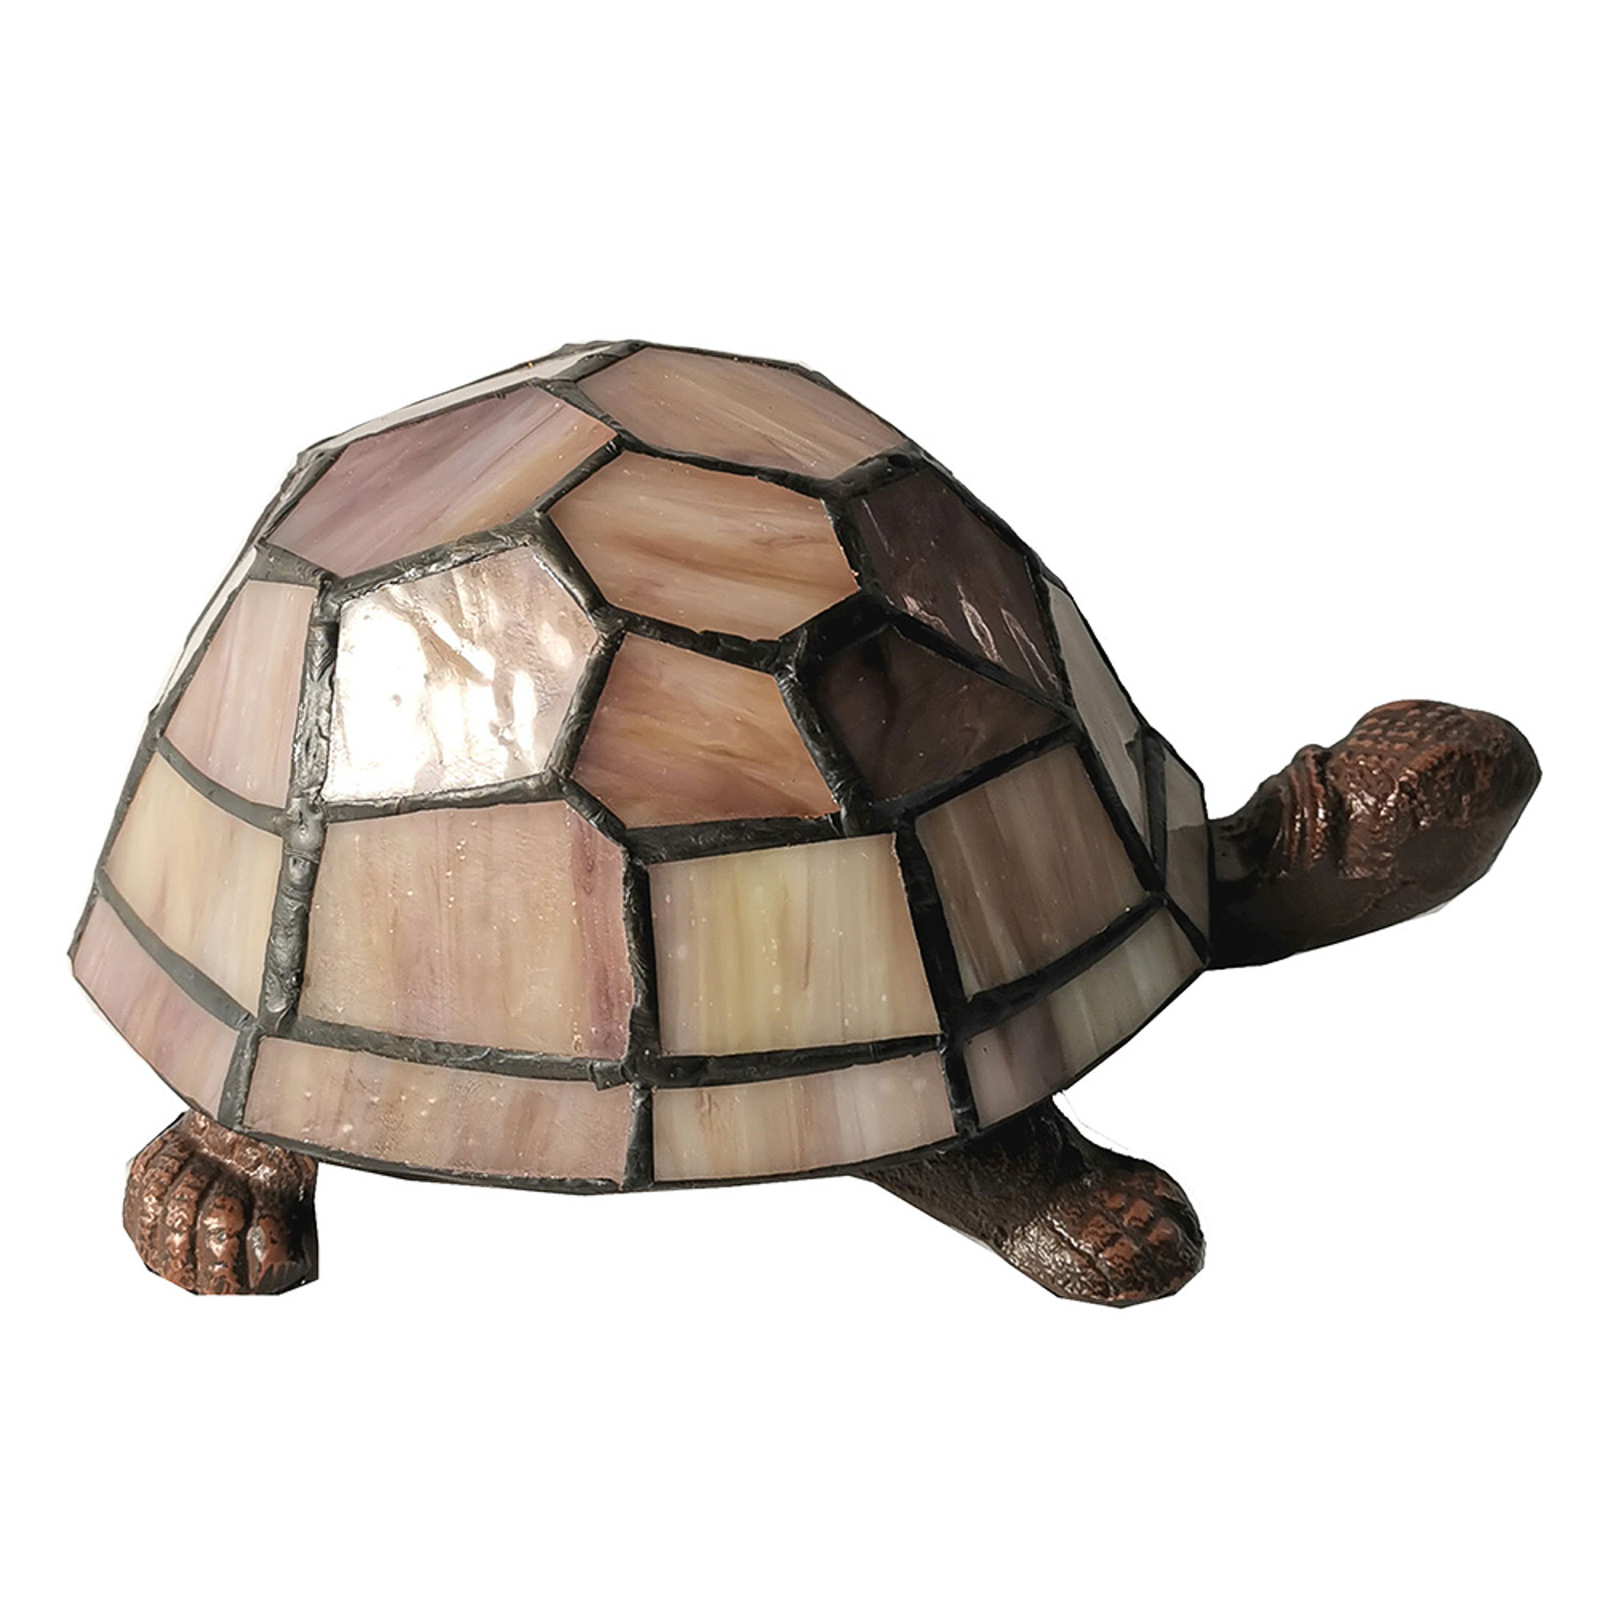 5LL-6054 turtle Tiffany-style table lamp